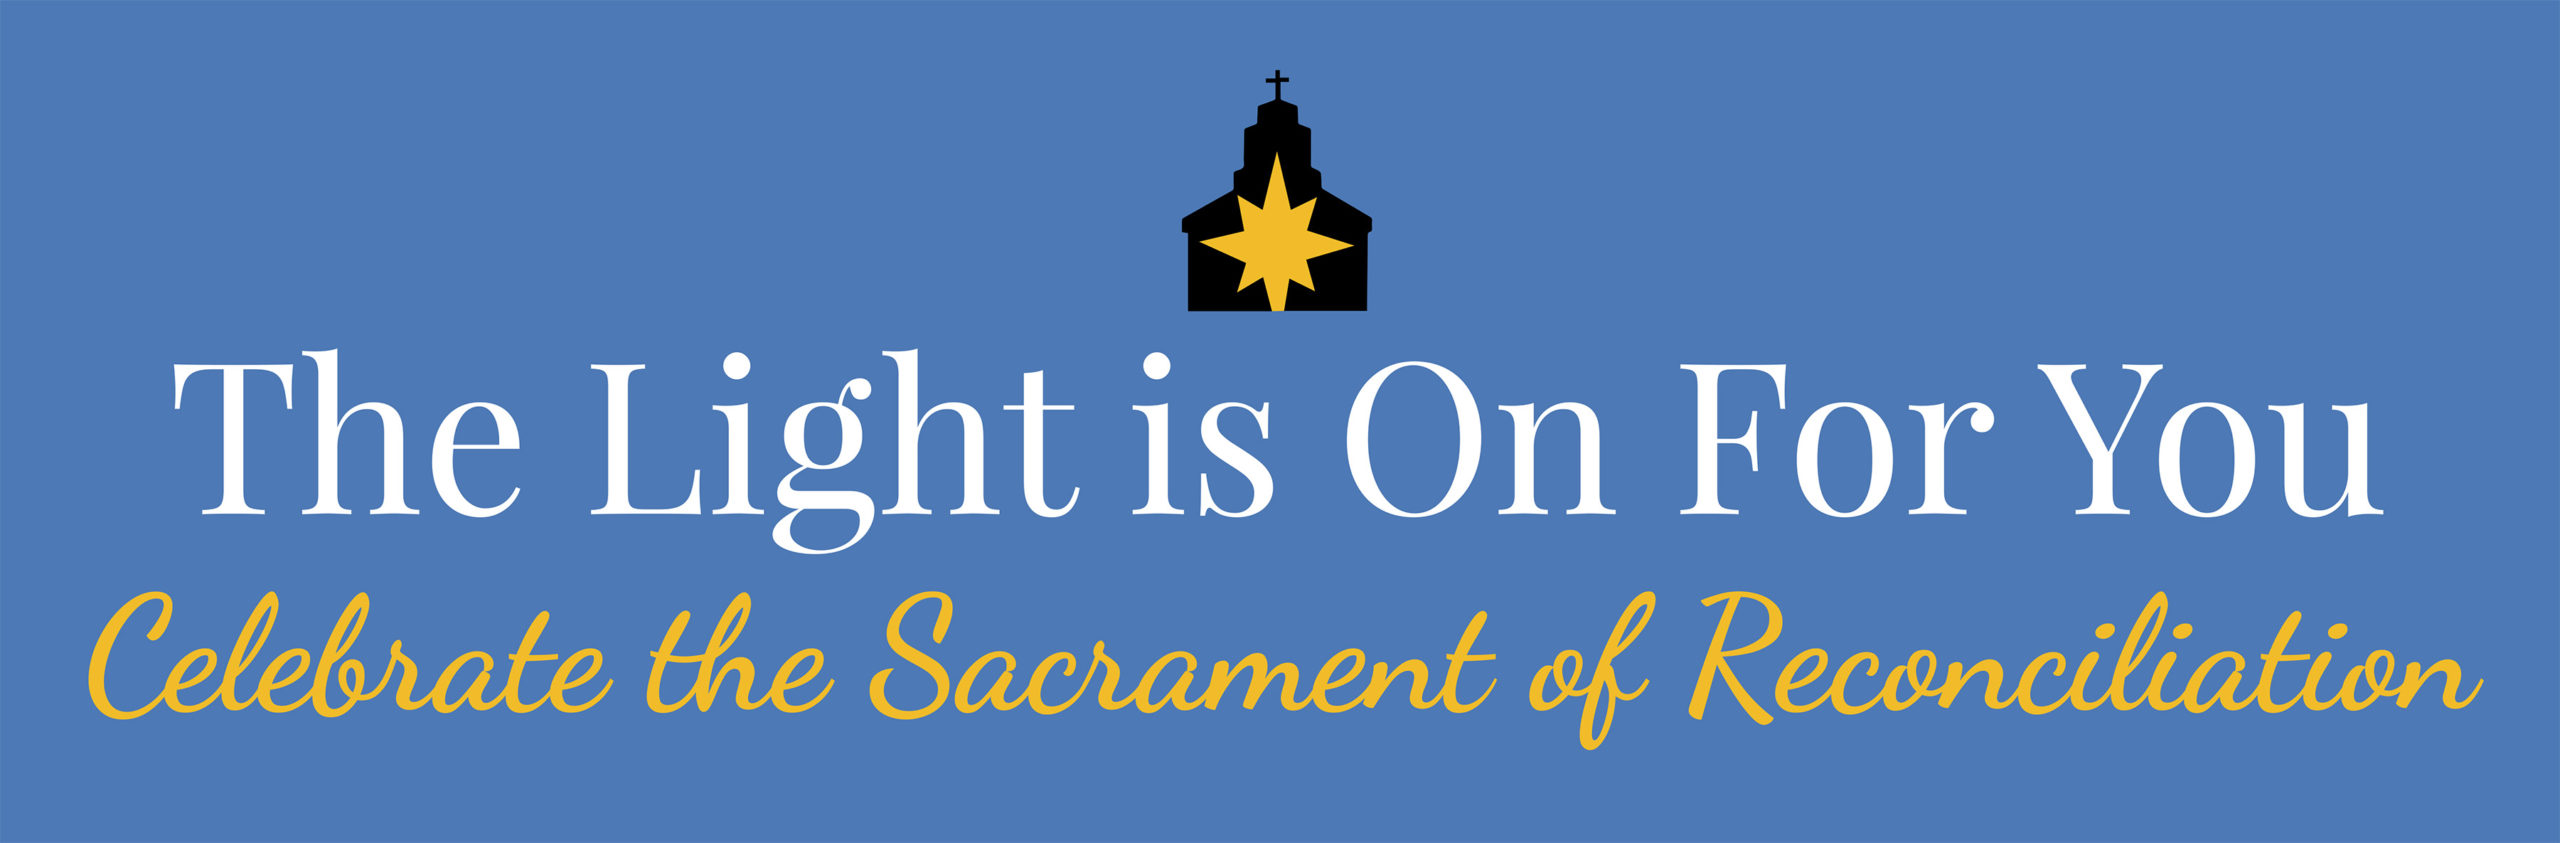 The Light is on for You - Celebrate the Sacrament of Reconciliation